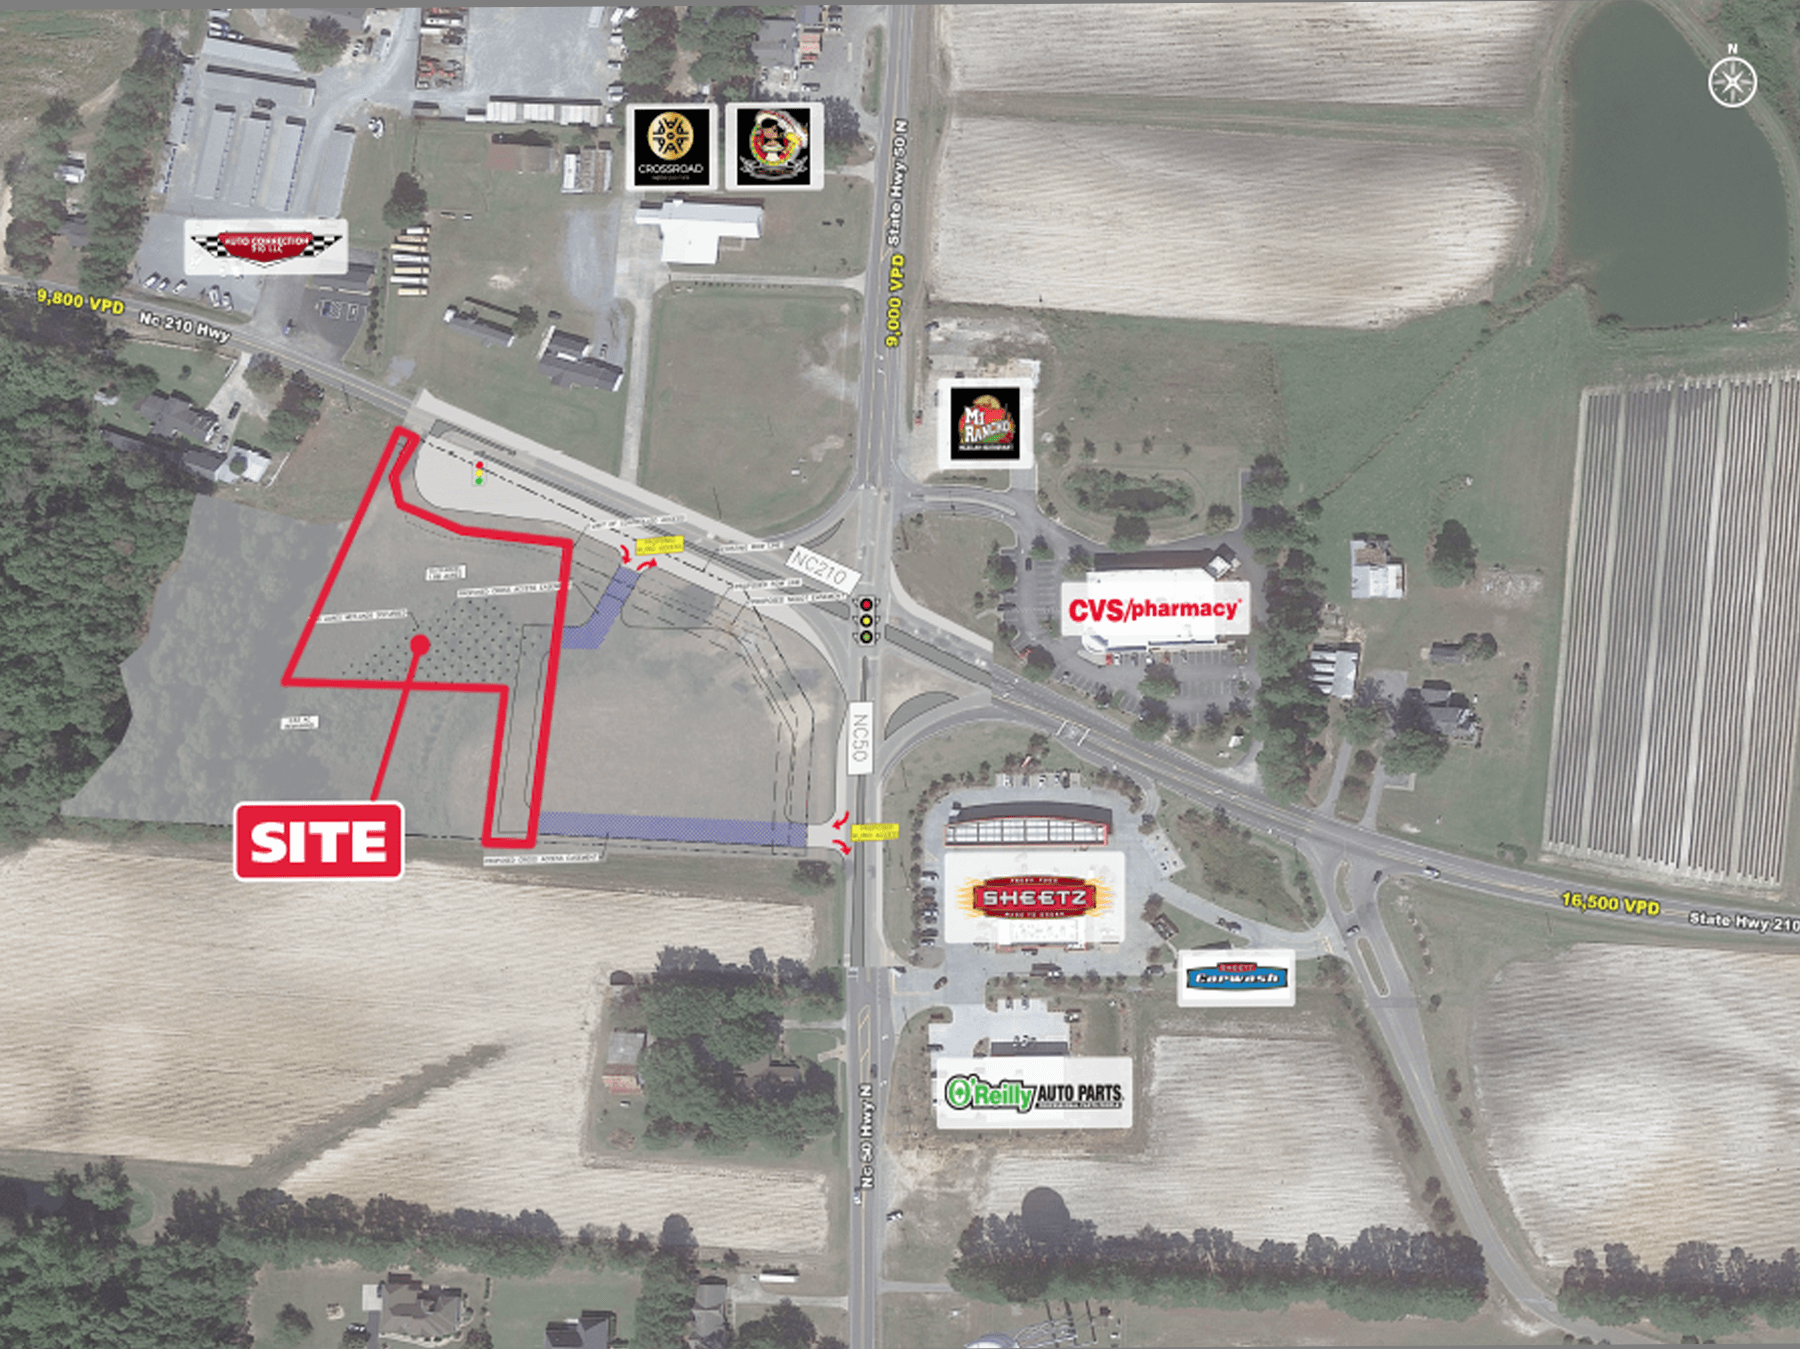 BENSON, NC PAD SITE – ADJACENT TO INDUSTRY LEADING CONVENIENT STORE